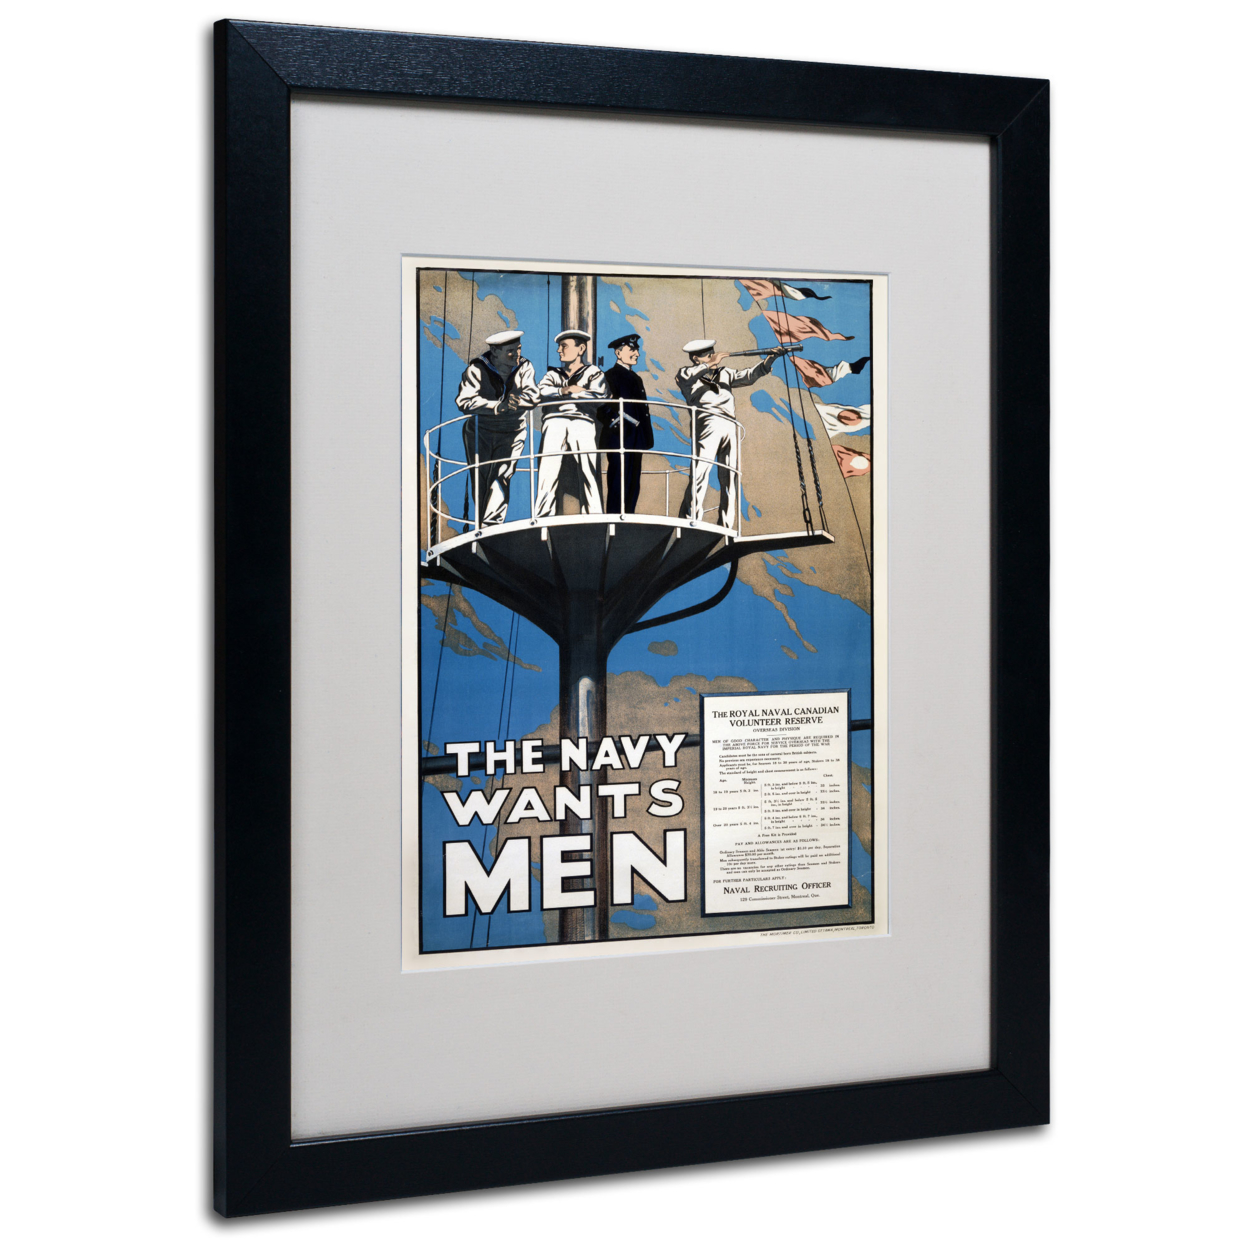 Recruitment Poster For The Canadian Navy' Black Wooden Framed Art 18 X 22 Inches